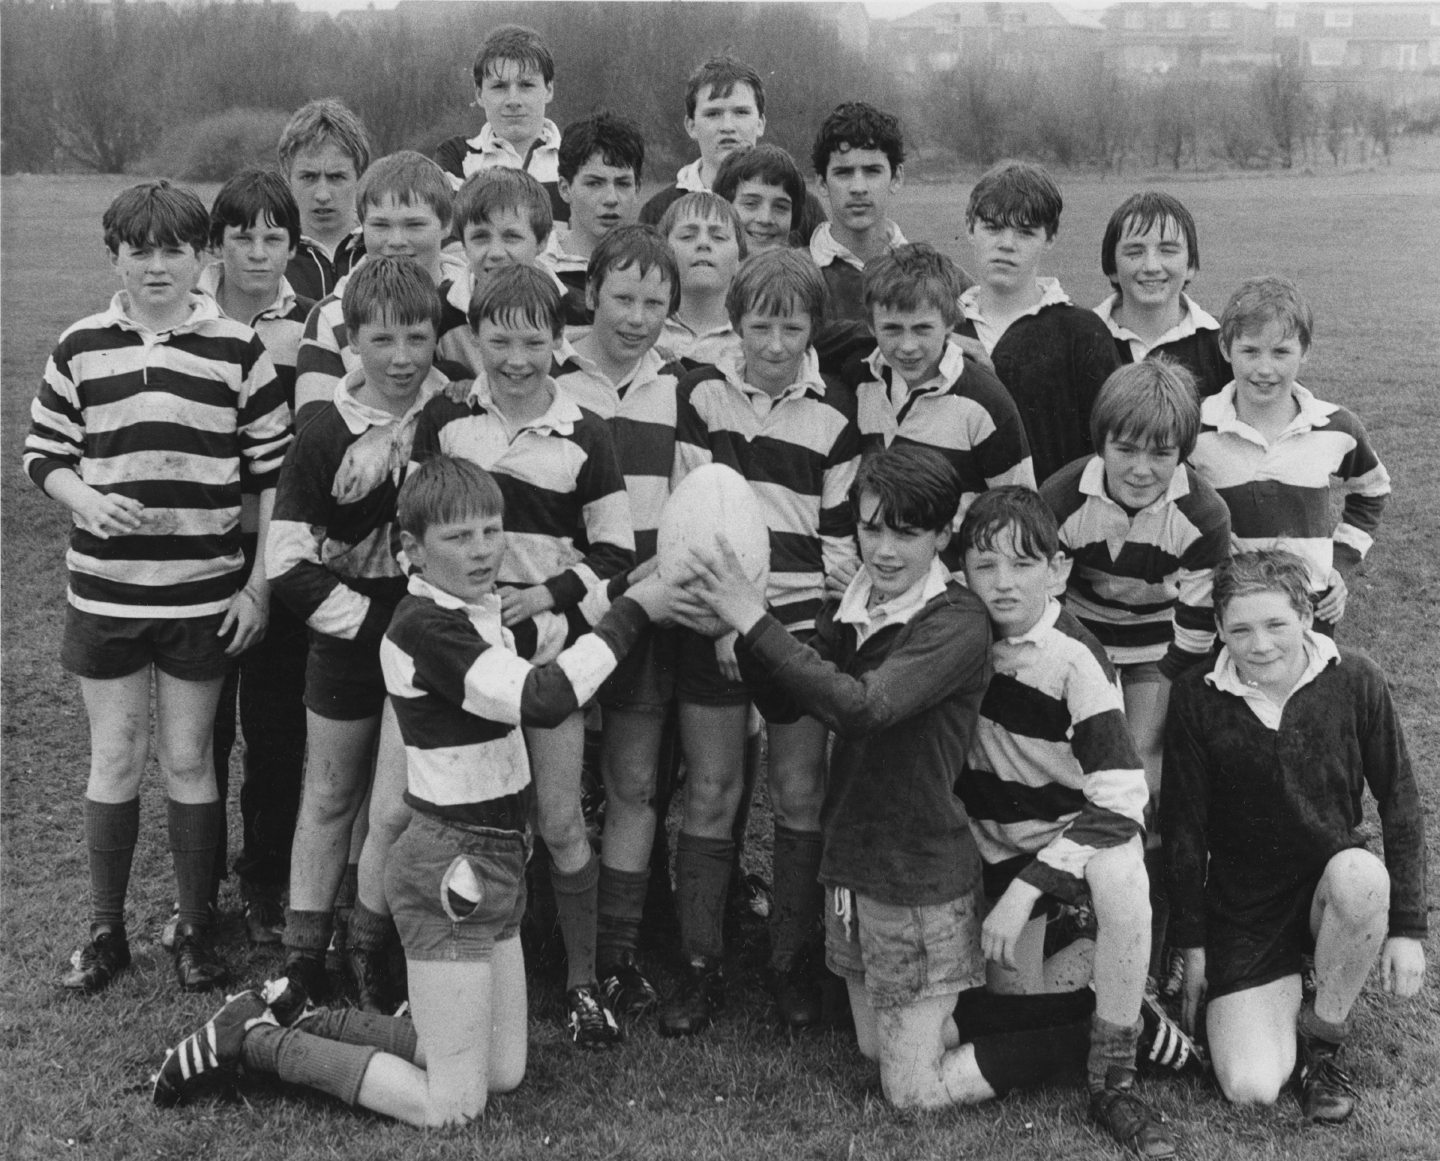 The grammar school's 1st and 2nd year rugby teams in 1983.